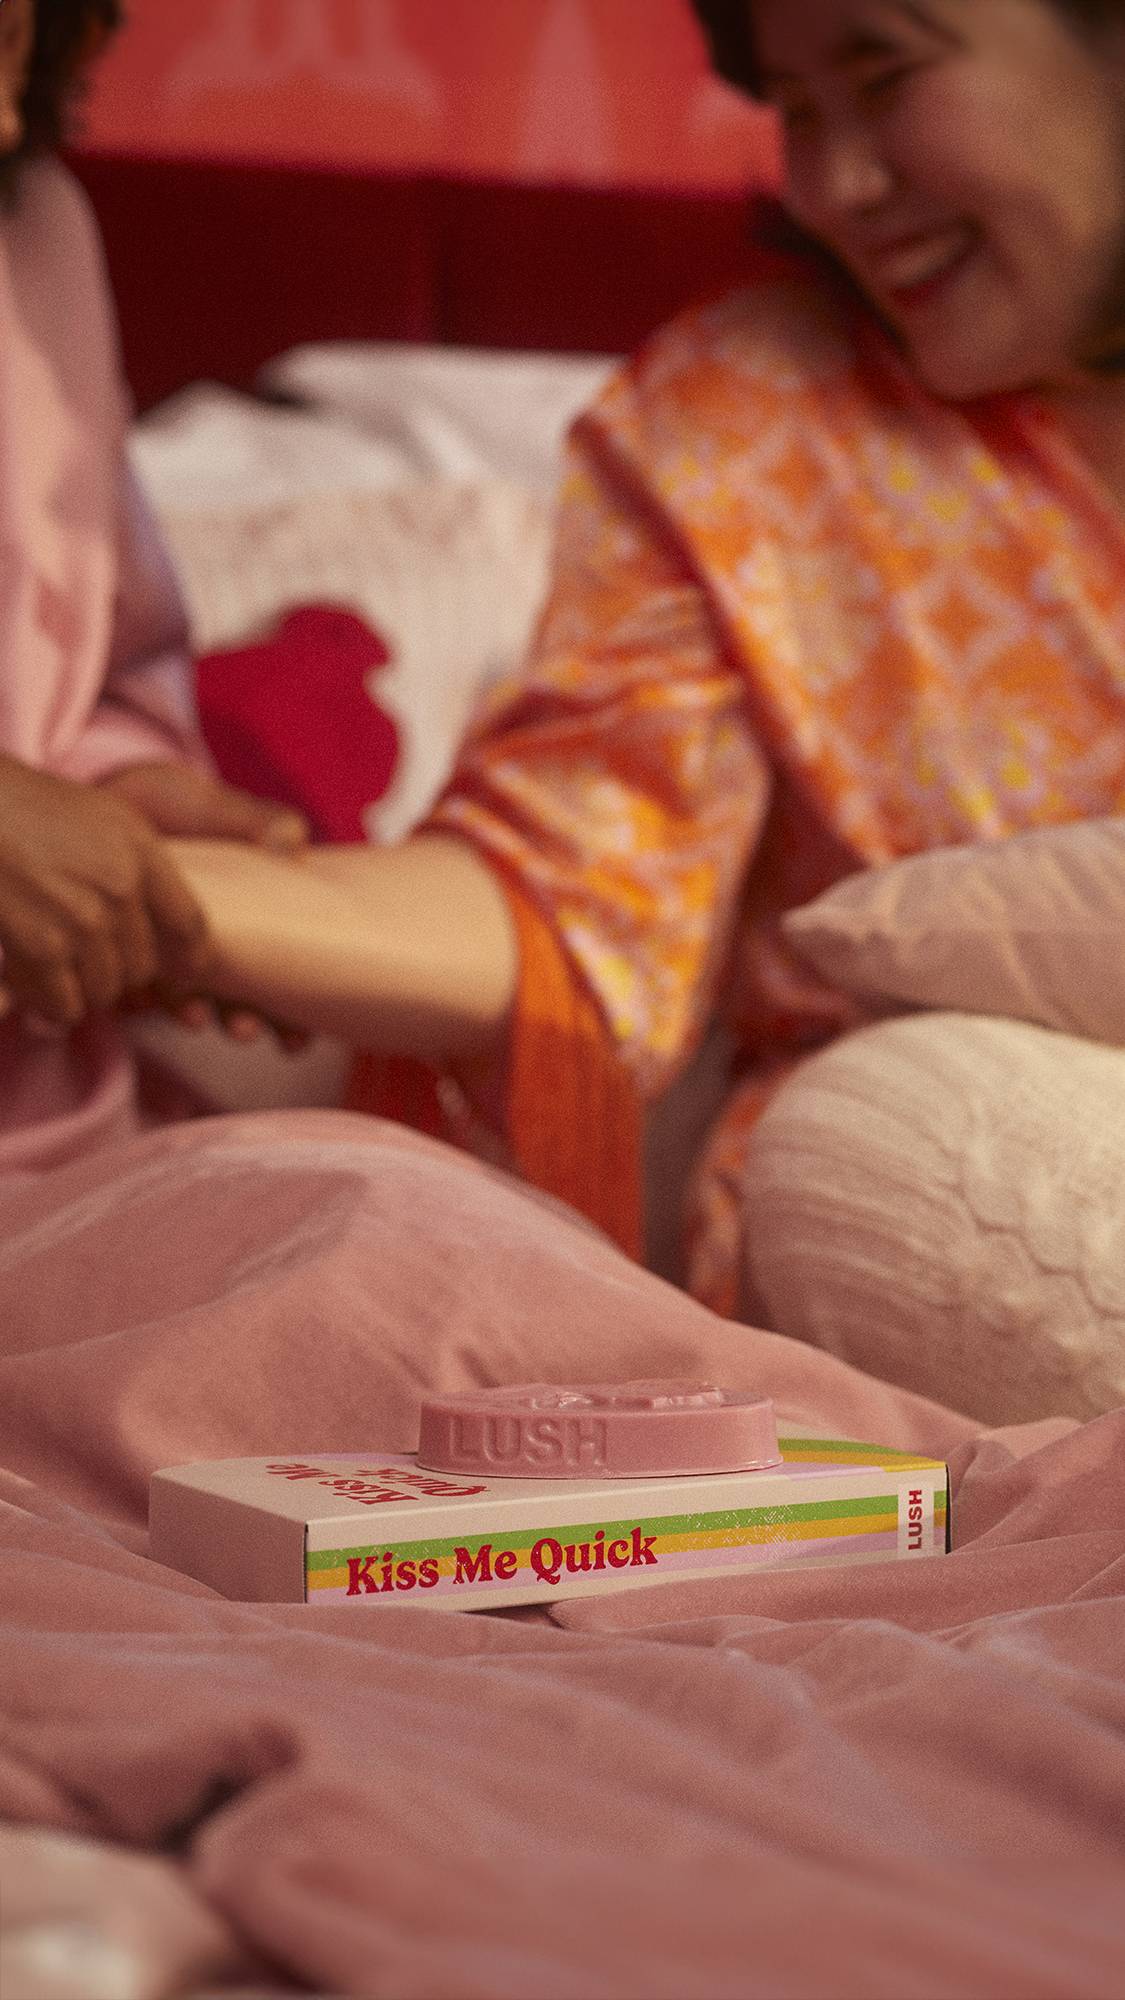 Image is focused on the Rose Argan massage bare in the foreground as it sits on a retro VHS tape box.